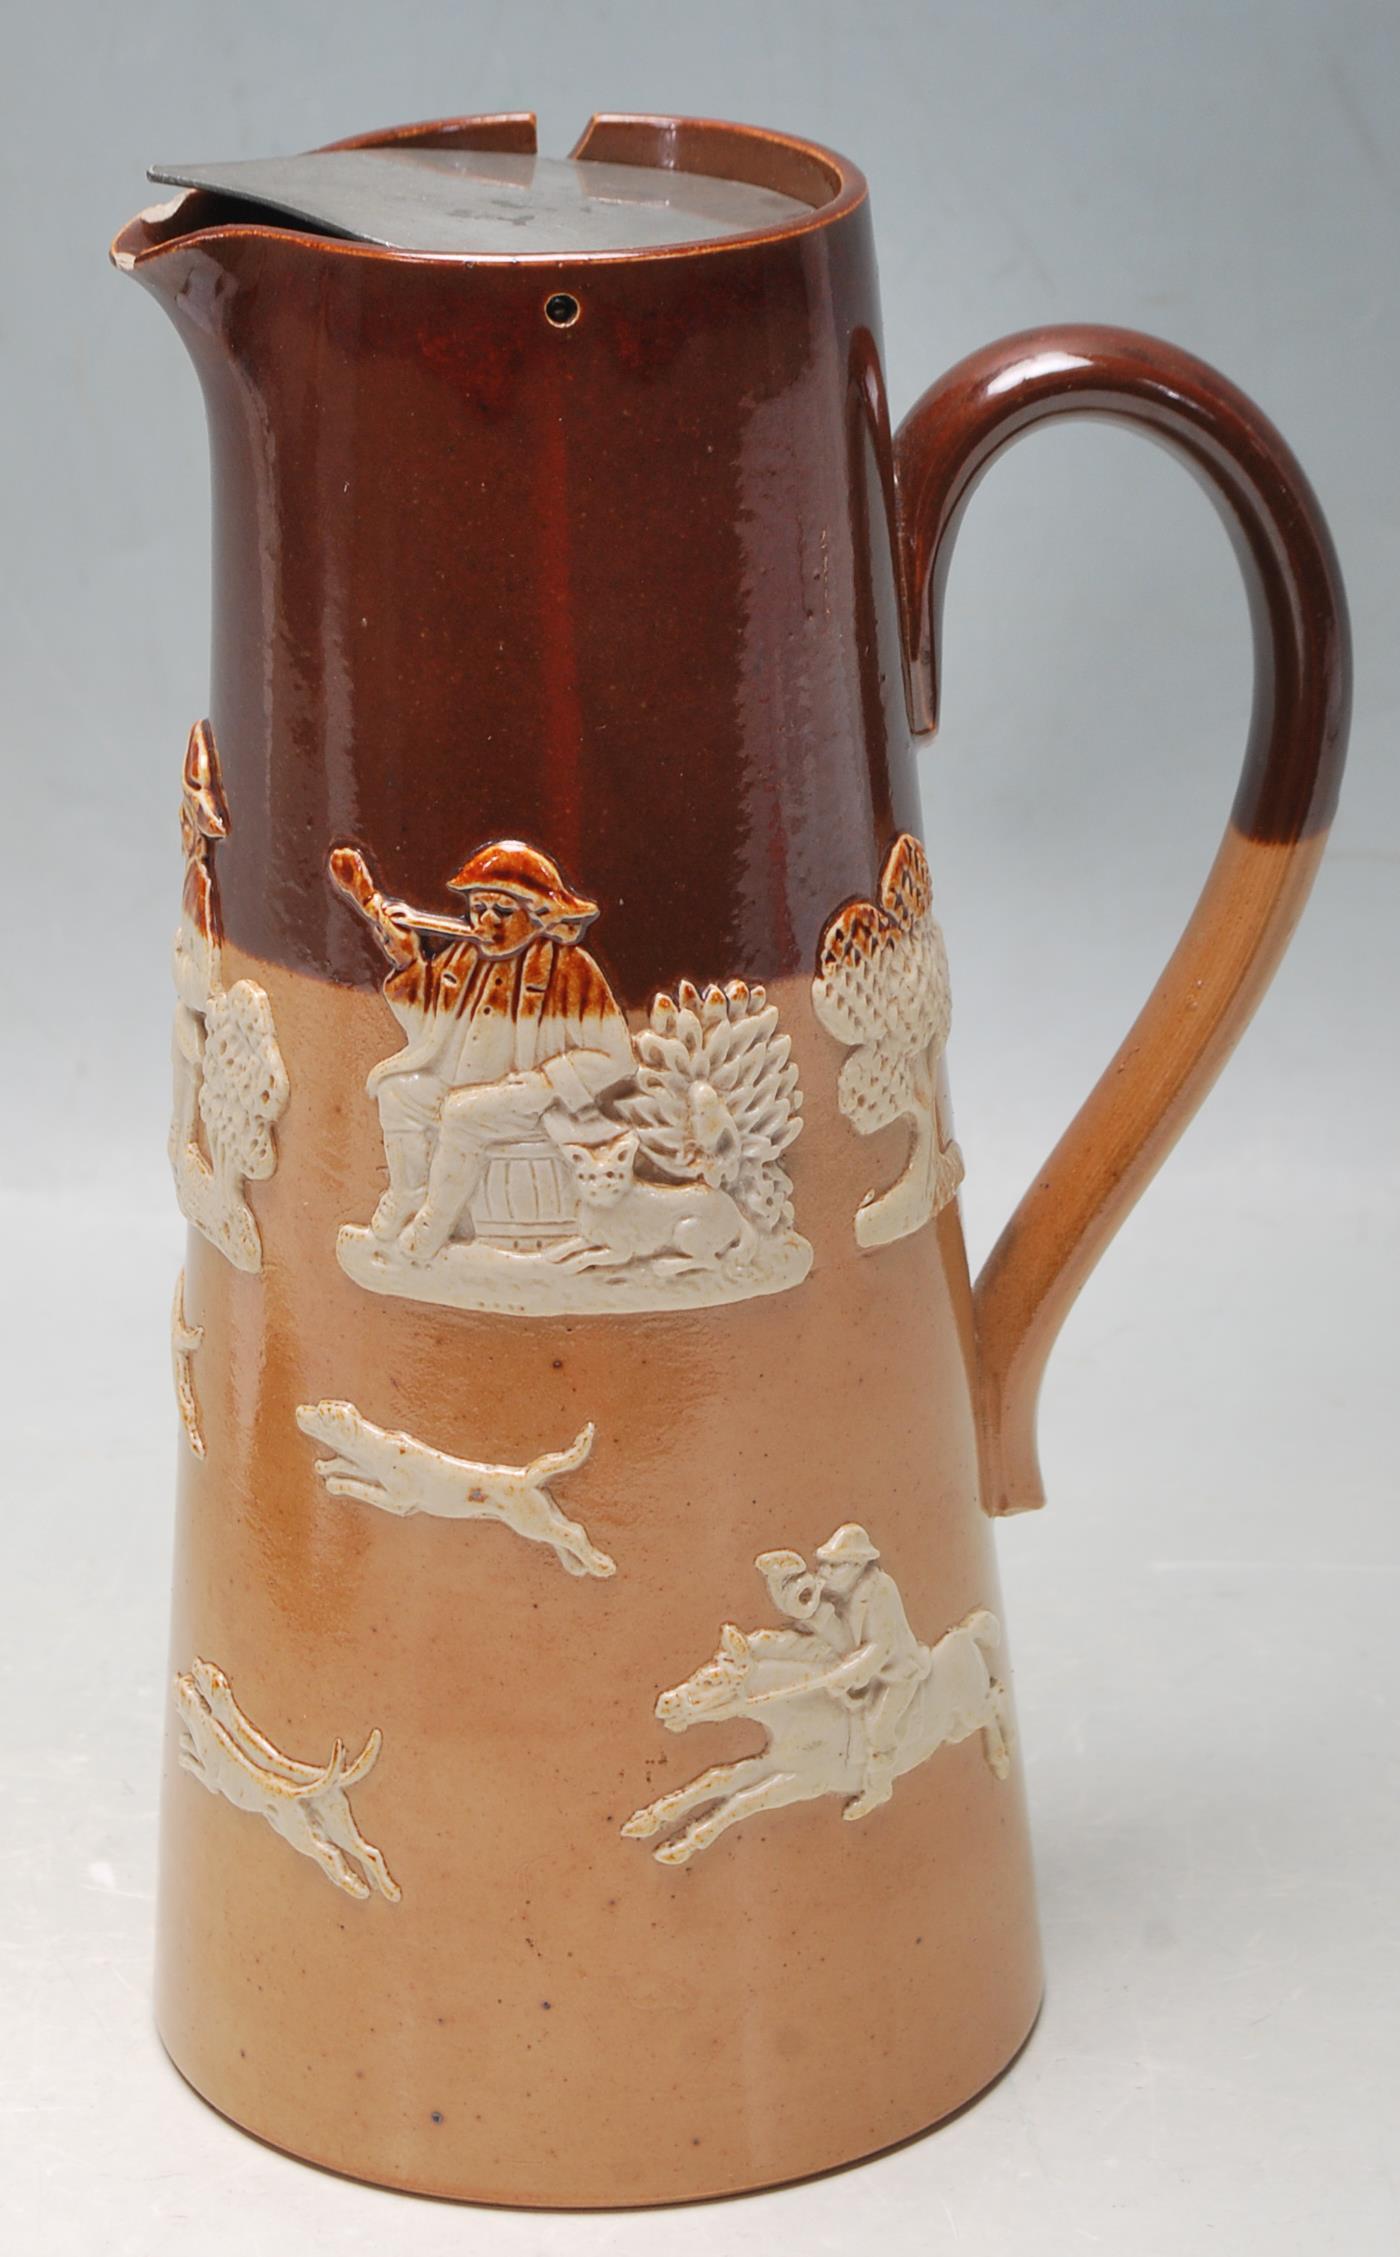 EARLY 20TH CENTURY ROYAL DOULTON WINE EWER